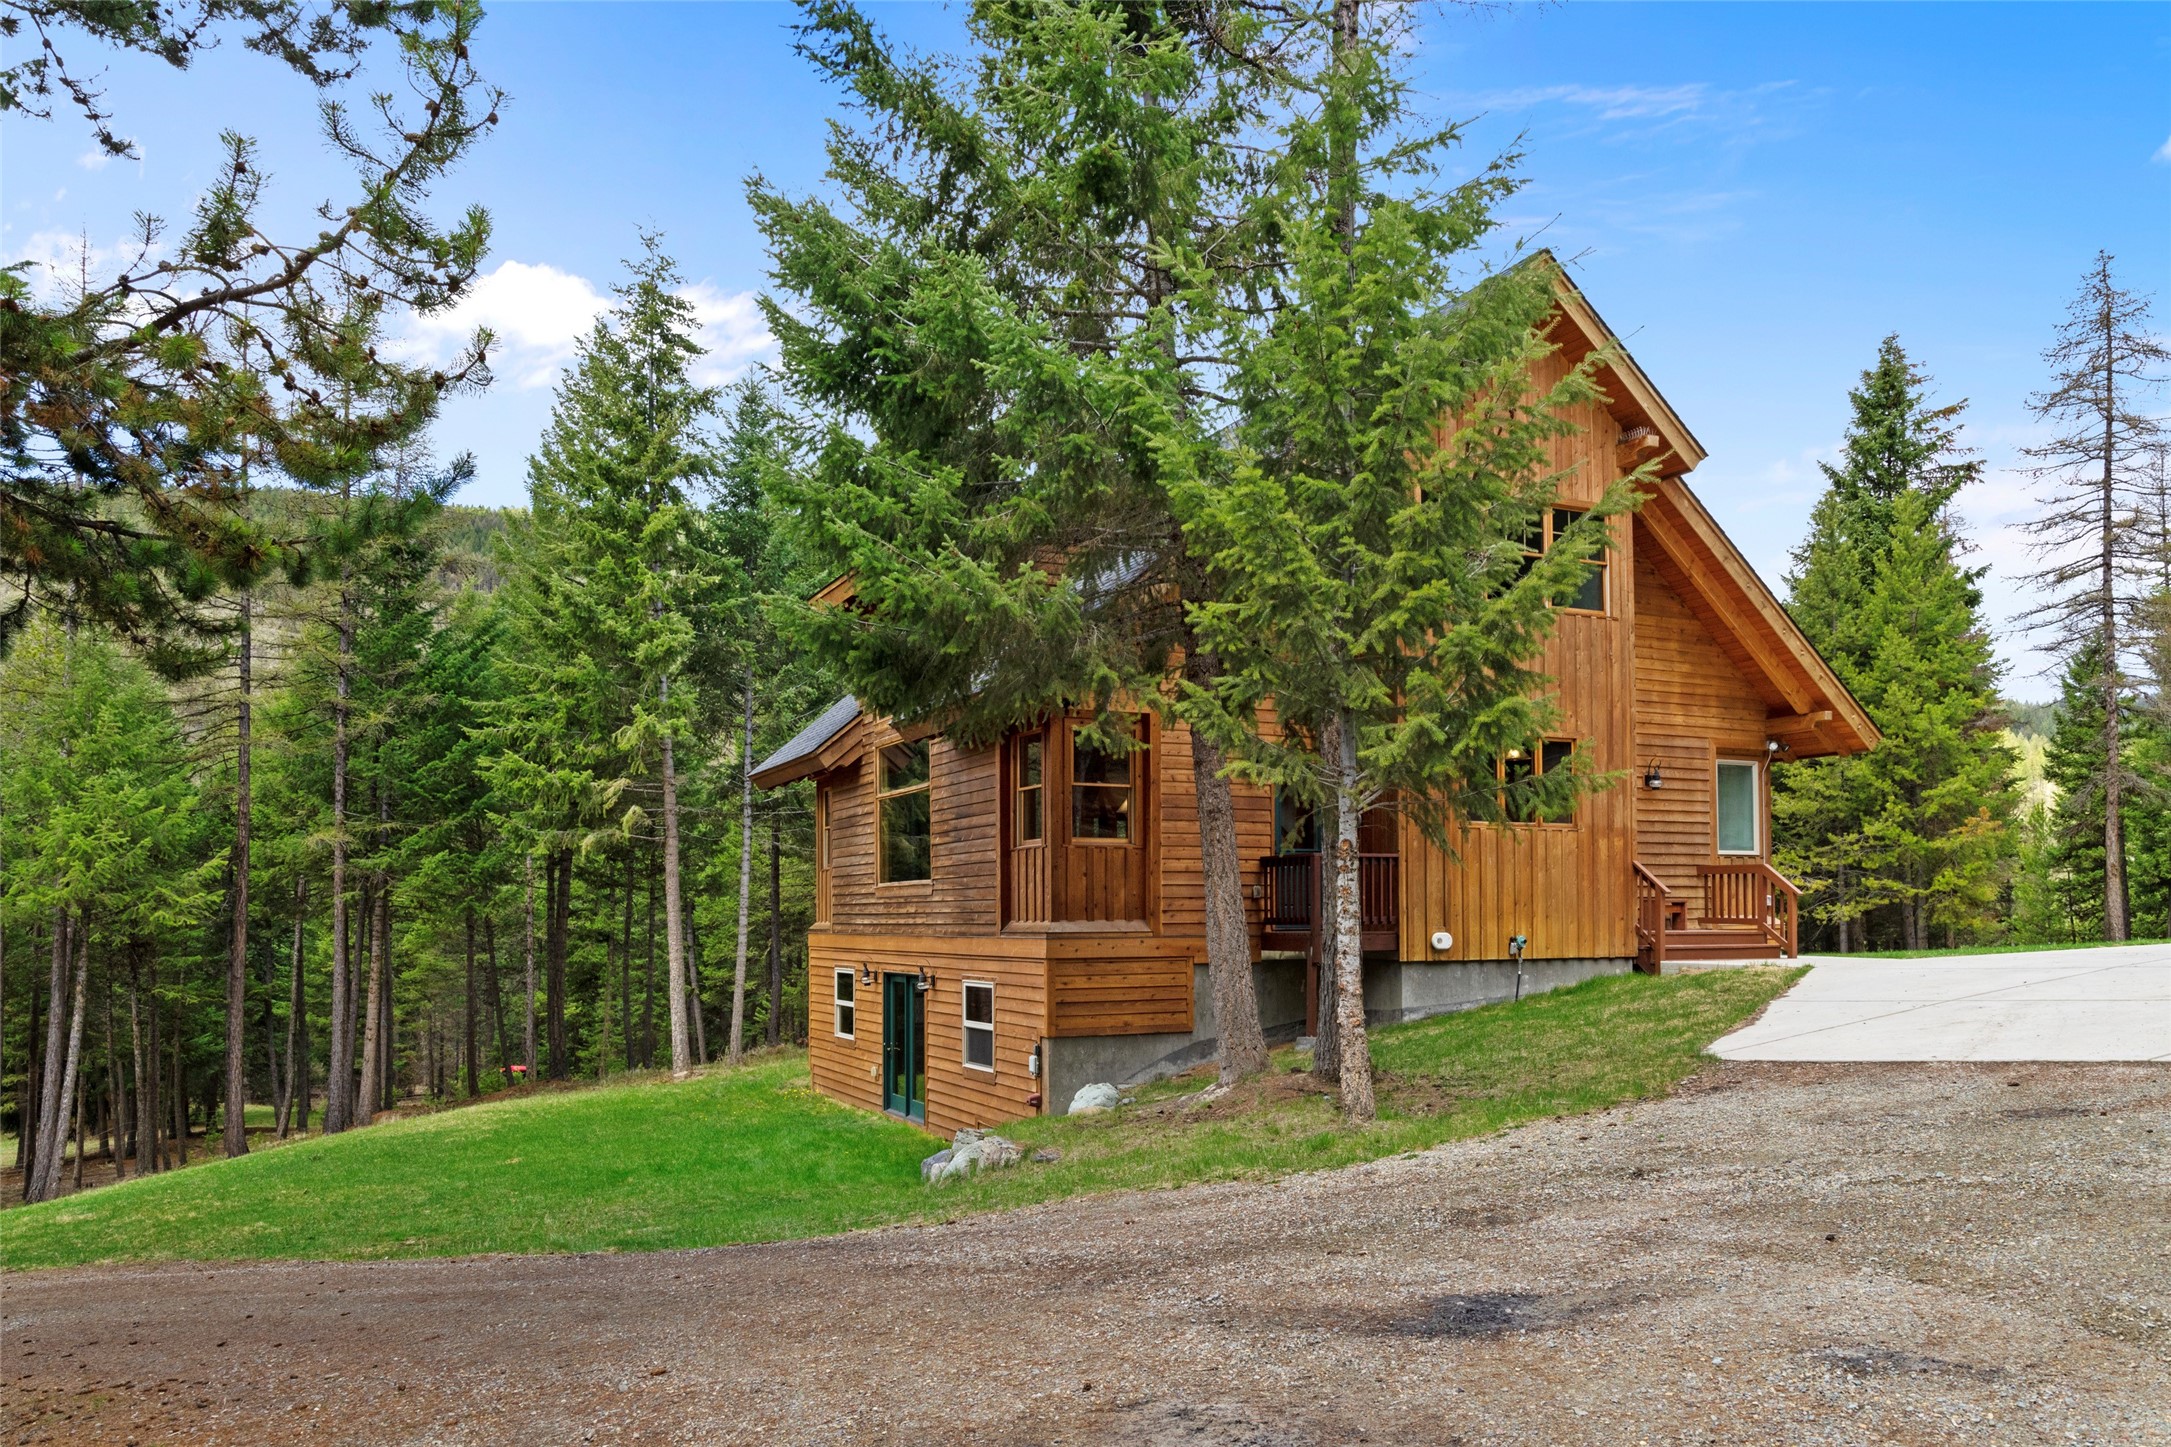 This custom timber-framed home on 21+ acres—surrounded on two sides by thousands of acres of national forest—is a slice of true Montana living!  Boasting endless wildlife, a year-round creek, and complete privacy behind a private gated entry and electric perimeter fencing, it is rare to find such a stunning, “parked-out” property less than 30 minutes from Costco and downtown Kalispell.

The 3400+ sqft meticulously maintained home was featured in Timberhome Living Magazine, and offers plenty of natural light from the oversized windows, gorgeous hand-pegged Douglas fir timbers, and breathtaking vaulted ceilings.  The home’s 4 bedrooms, 3 bathrooms, 2 large family rooms, and bonus loft bedroom are heated by a recently upgraded high-efficiency radiant floor system. The top floor is highlighted by elaborate balusters, exuding a peaceful, airy feel throughout the home. The property also includes a nearly 2,000 sqft heated and insulated shop, and running water to one of four fully-fenced pastures.  Recreational opportunities abound on the extensive Wild Bill trail system, and nearby Blacktail Ski Resort.  Property can be subdivided into two 10+ acre parcels, with the beautiful Wild Bill Creek marking part of the boundary between parcels. Call Corey Olofson 406-253-0531, or your real estate professional for more information.